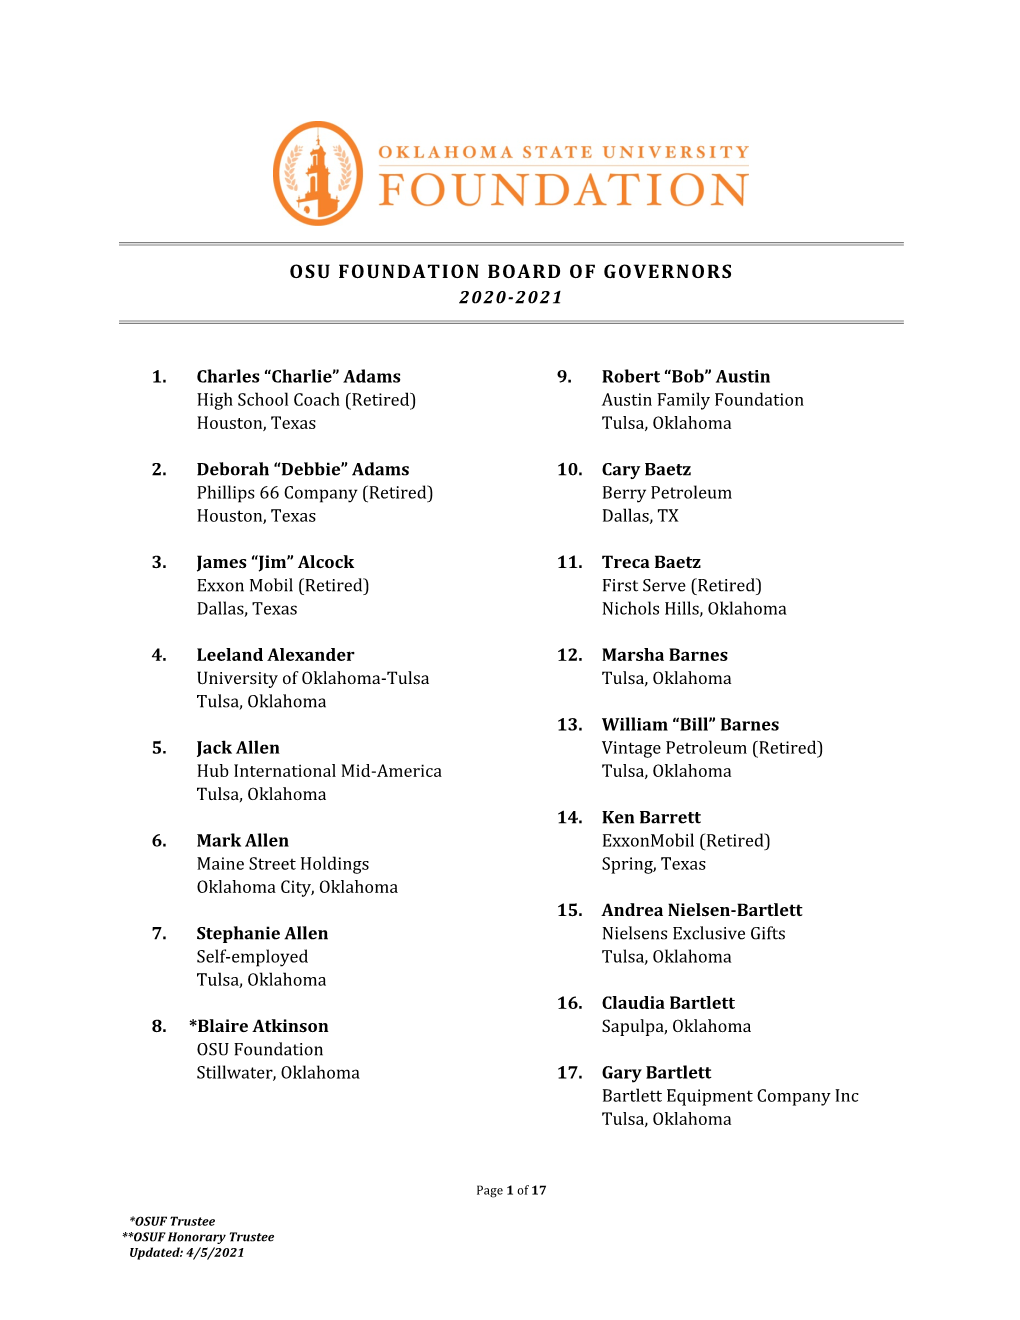 Osu Foundation Board of Governors 2020-2021